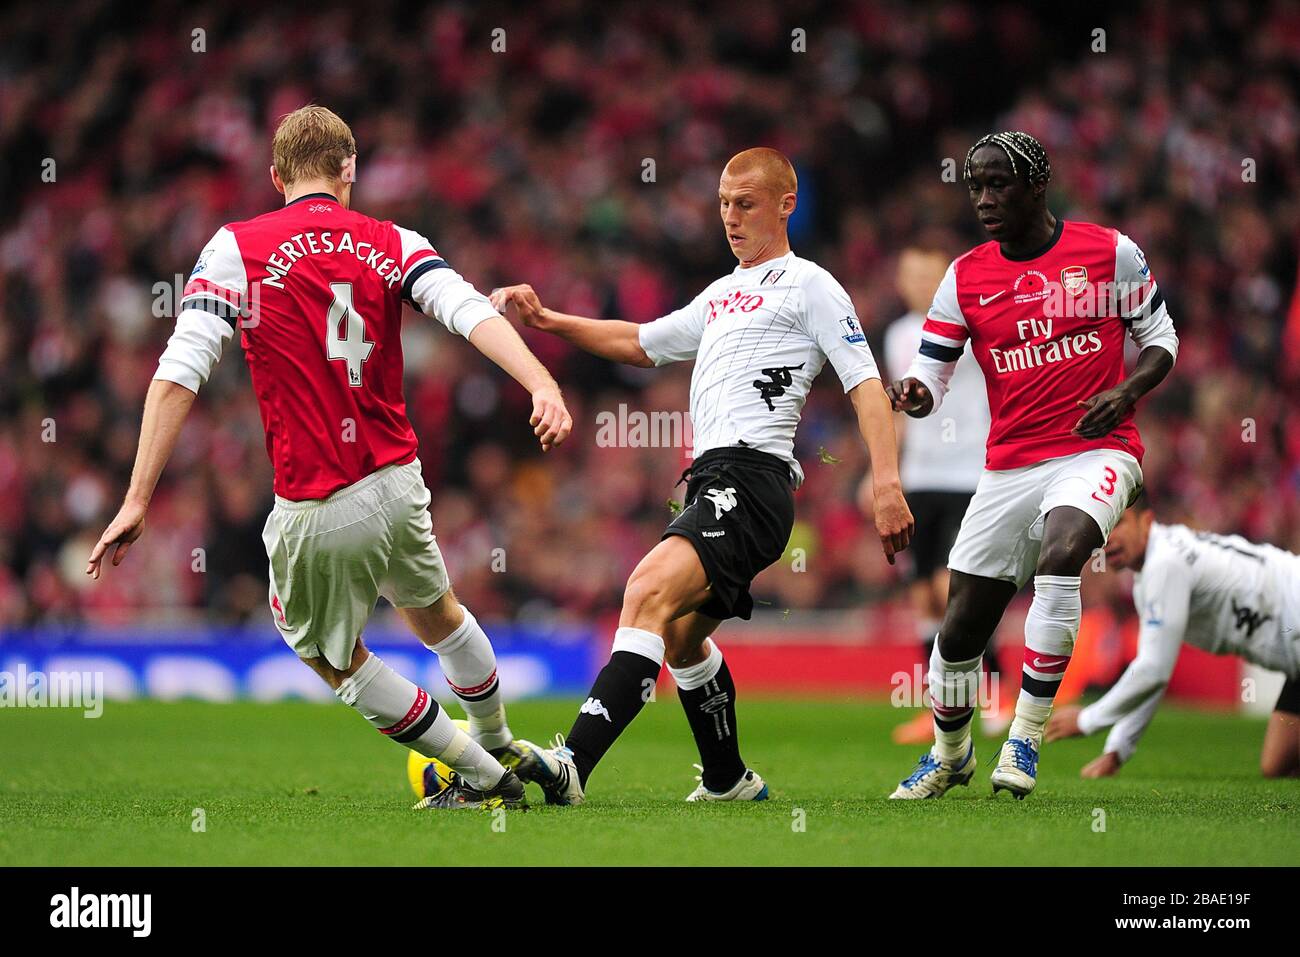 Fulham's Steve Sidwell (centre) battles for the ball with Arsenal's Bacary Sagna (right) and Per Mertesacker (left) Stock Photo